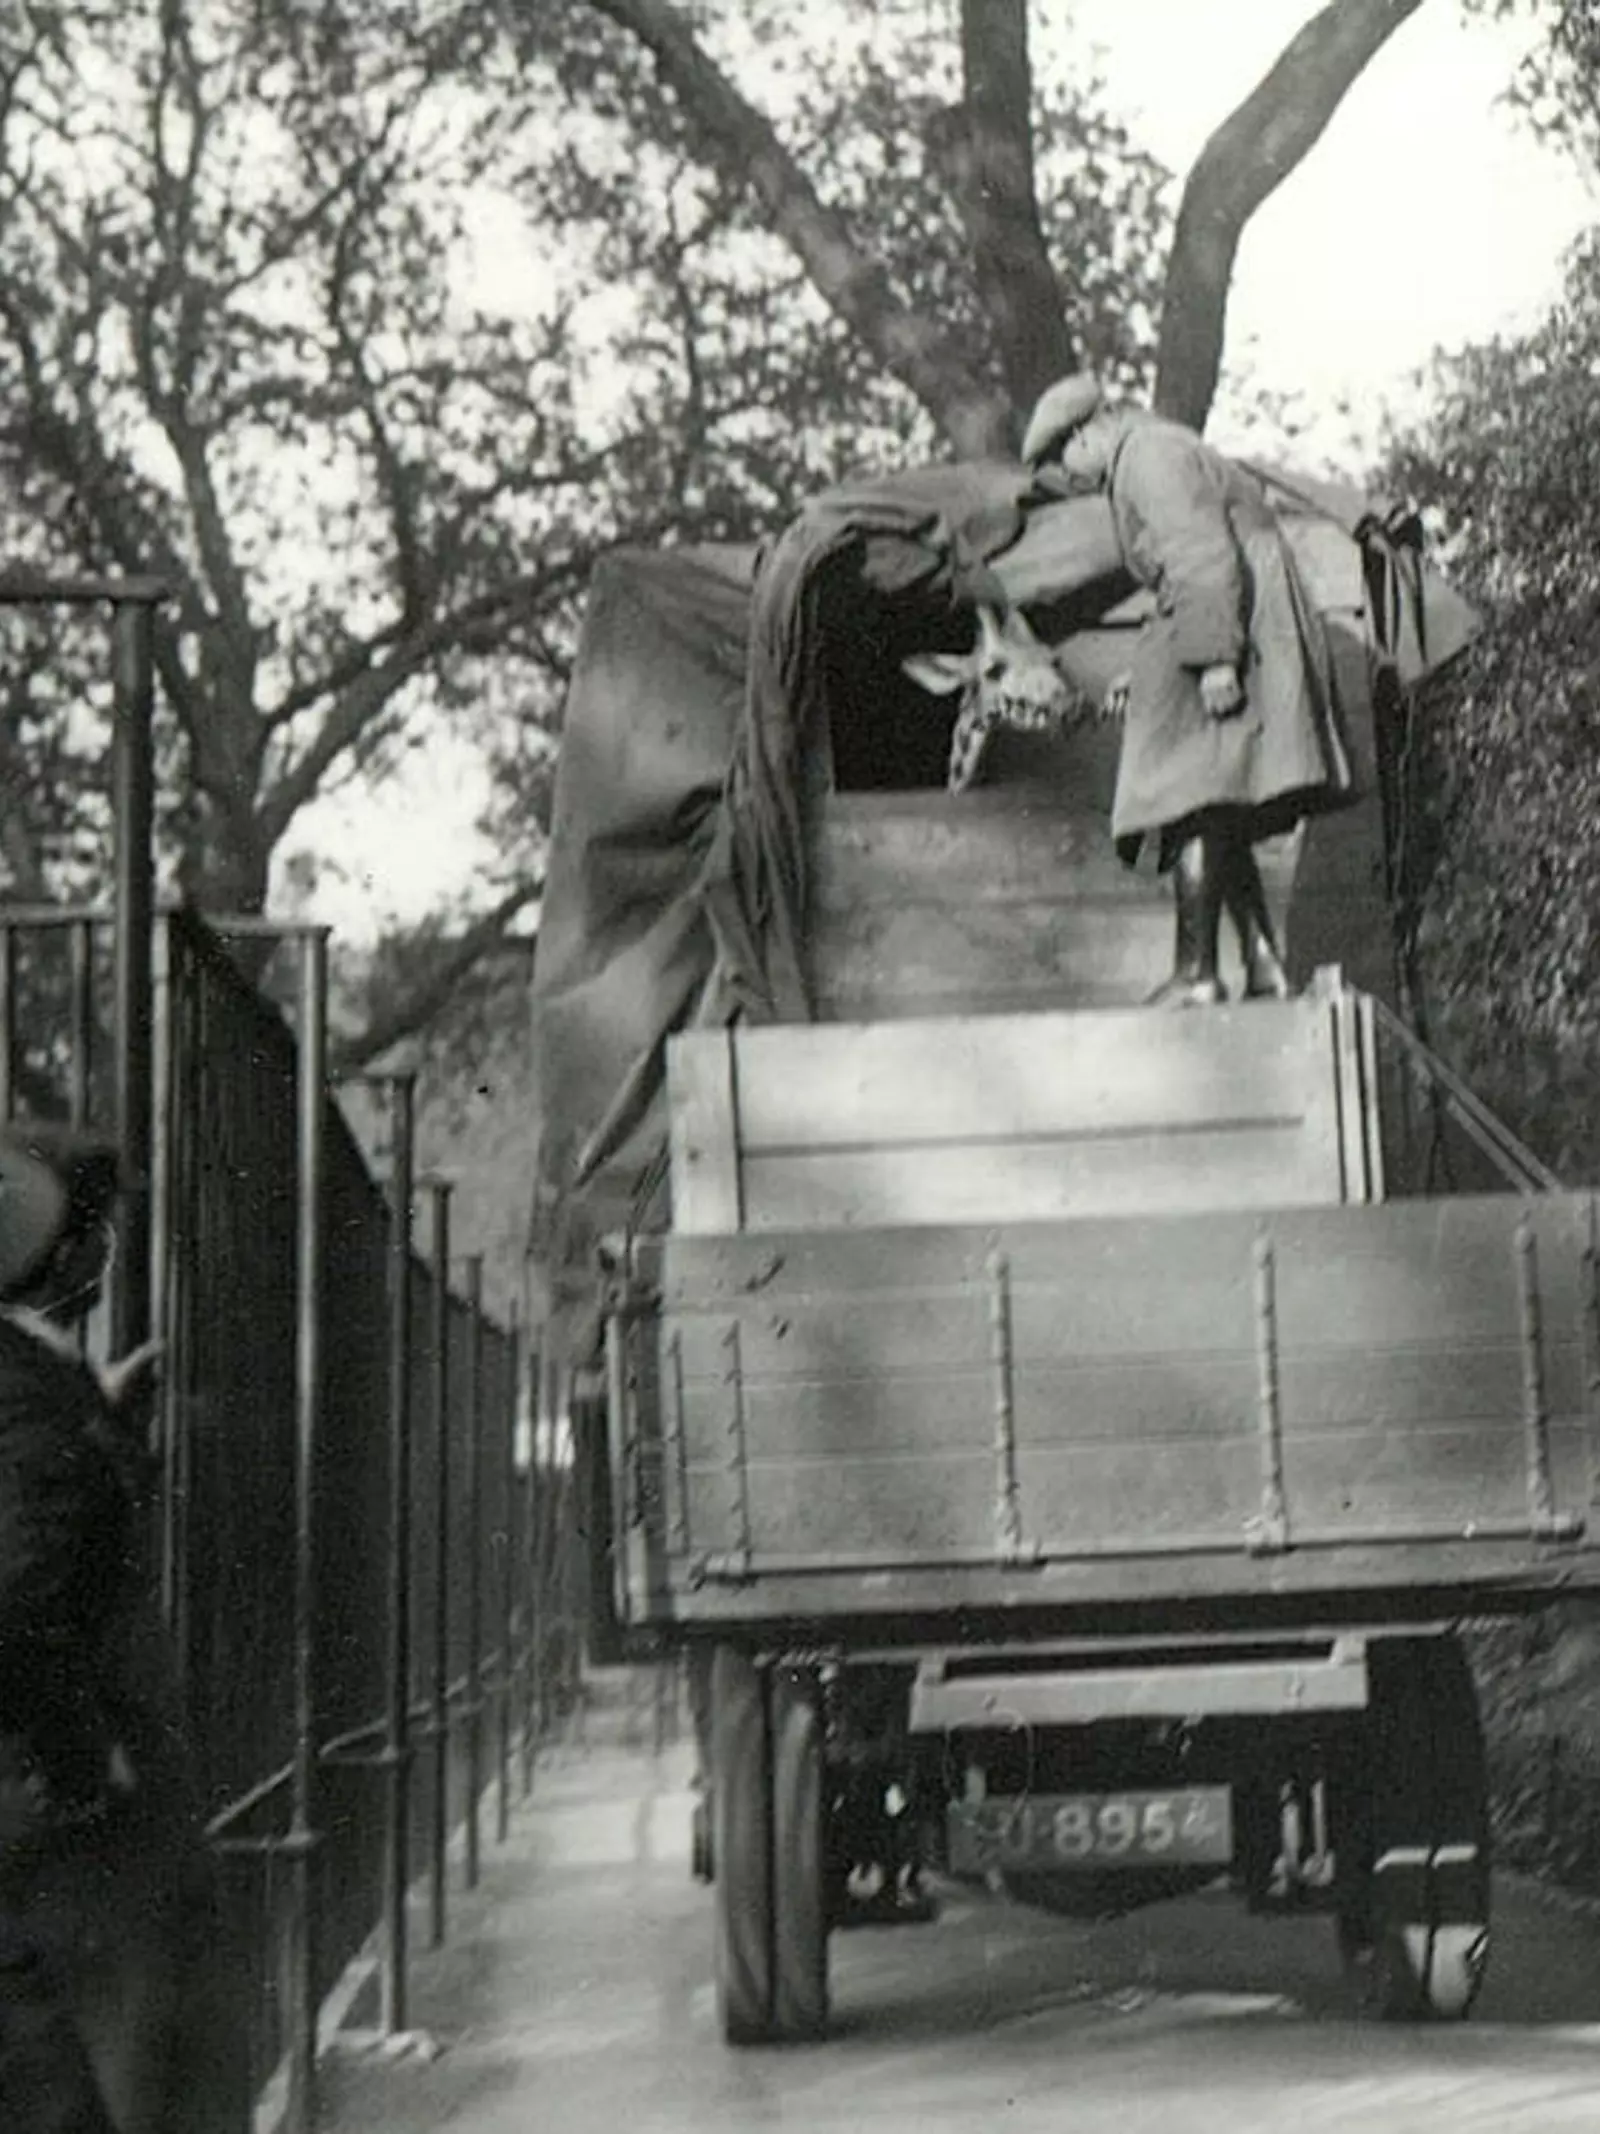 Giraffe being transited in a van at London Zoo